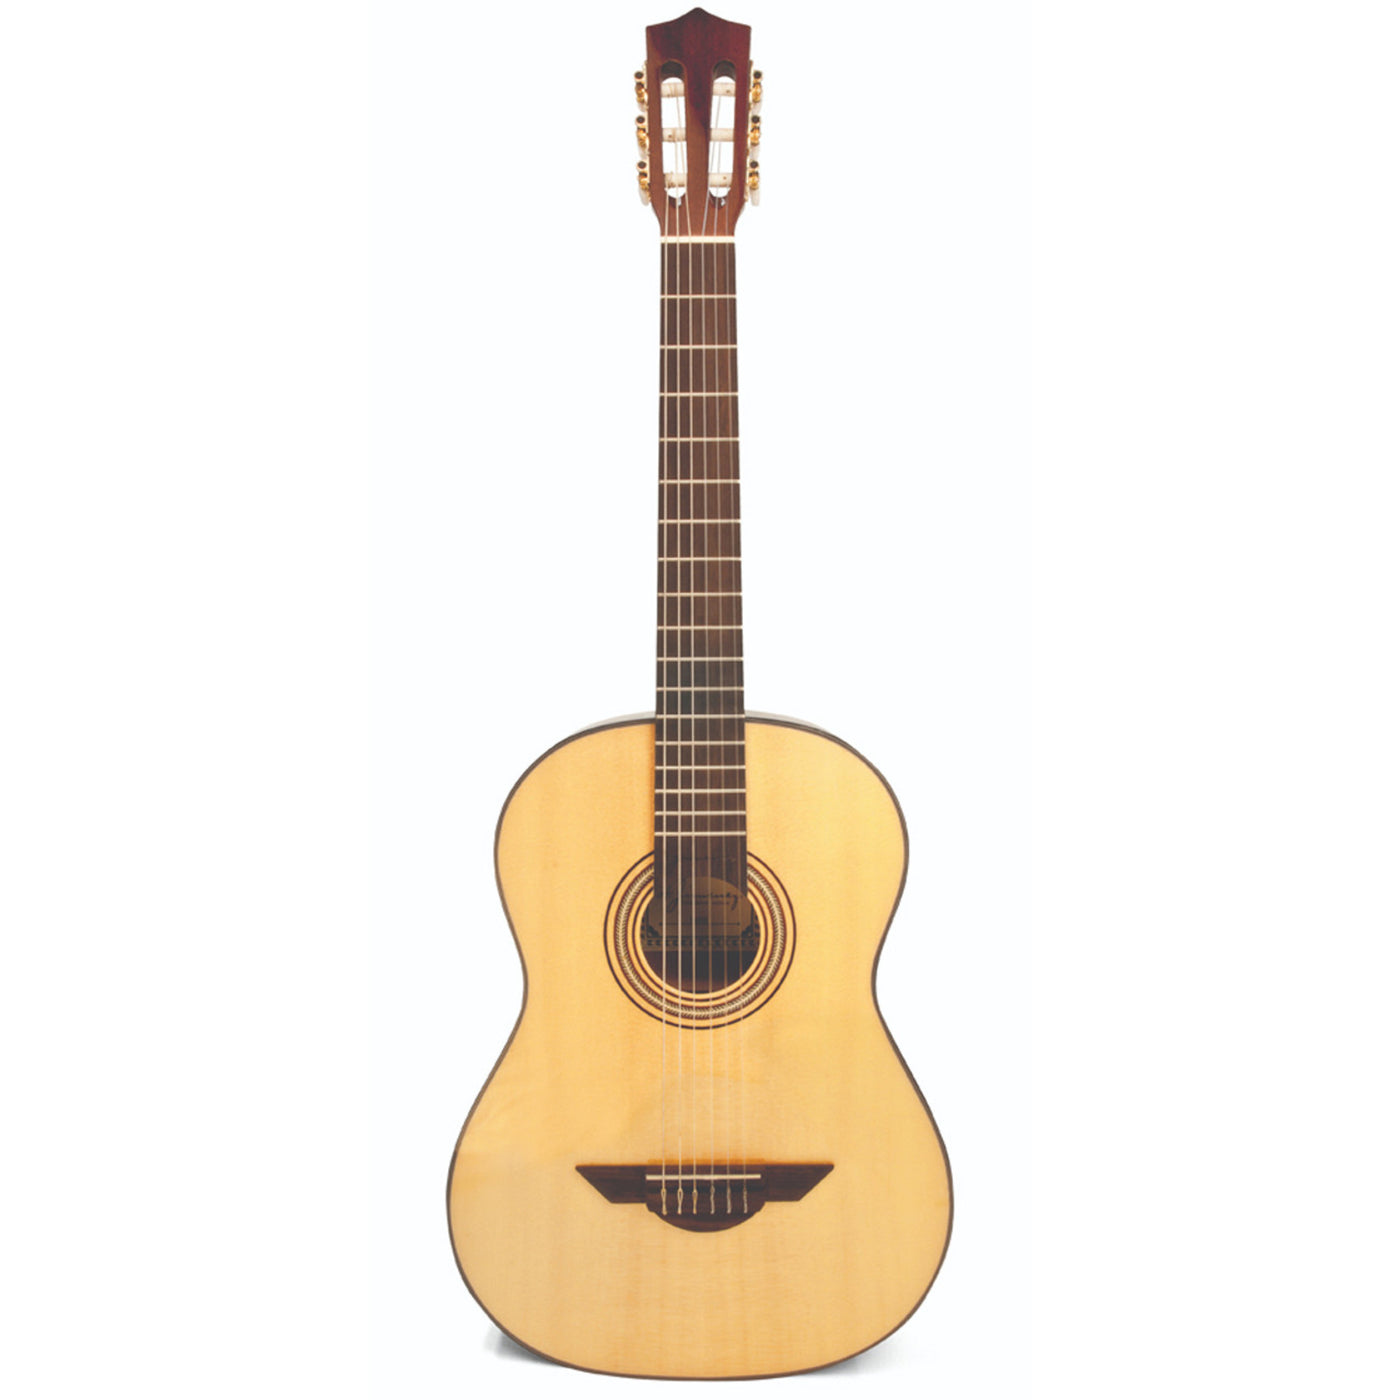 H. Jimenez LG2 El Artista Nylon Classical Guitar, with Laminated Spruce Top and Mahogany Back and Sides, Natural